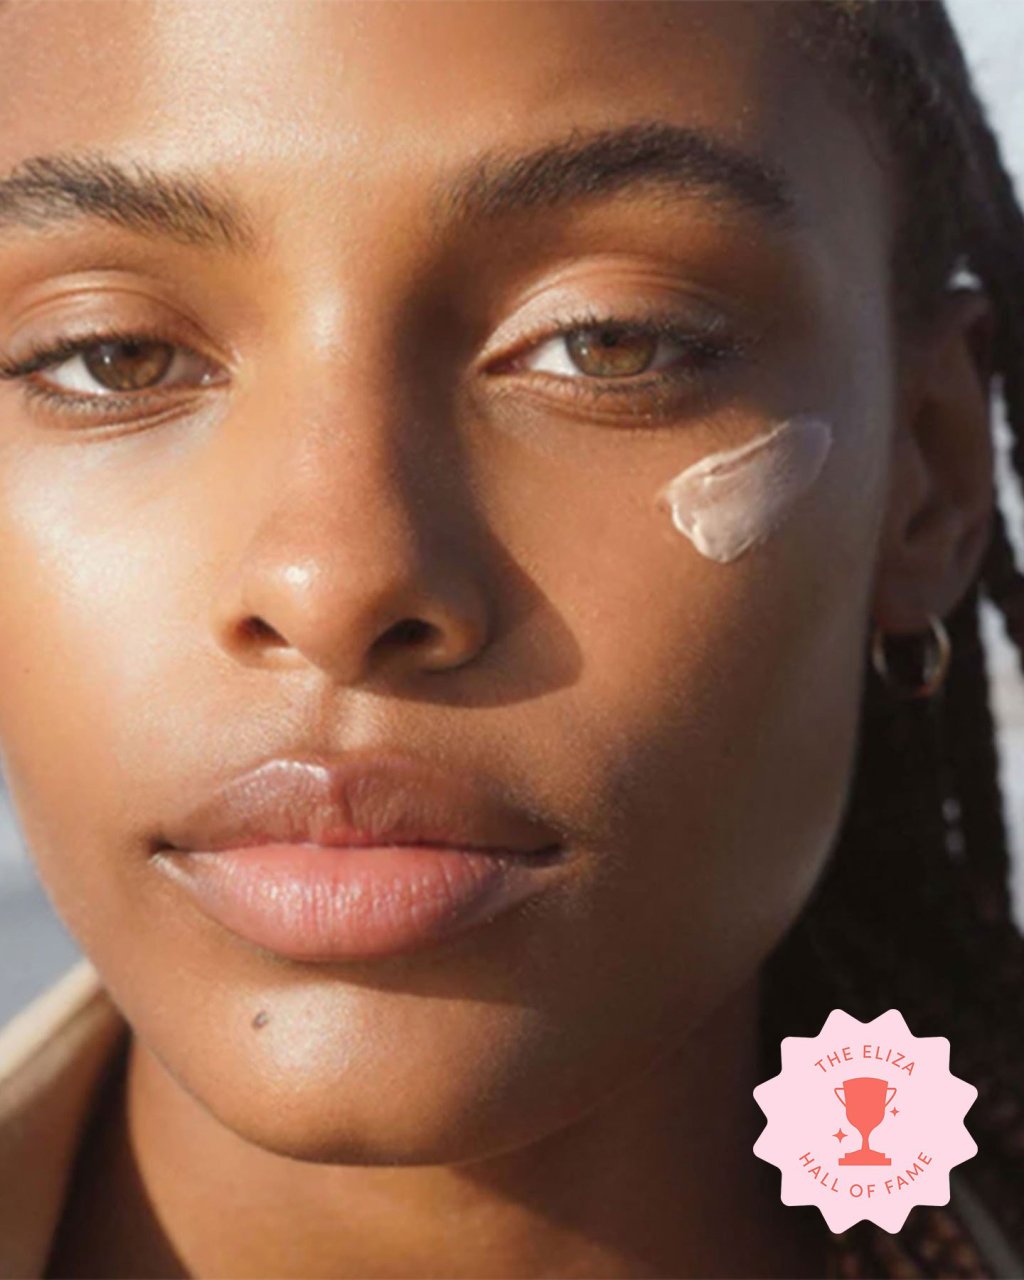 Puffy Eyes, Dark Circles, and Bags: Dermatologists Explain the Difference